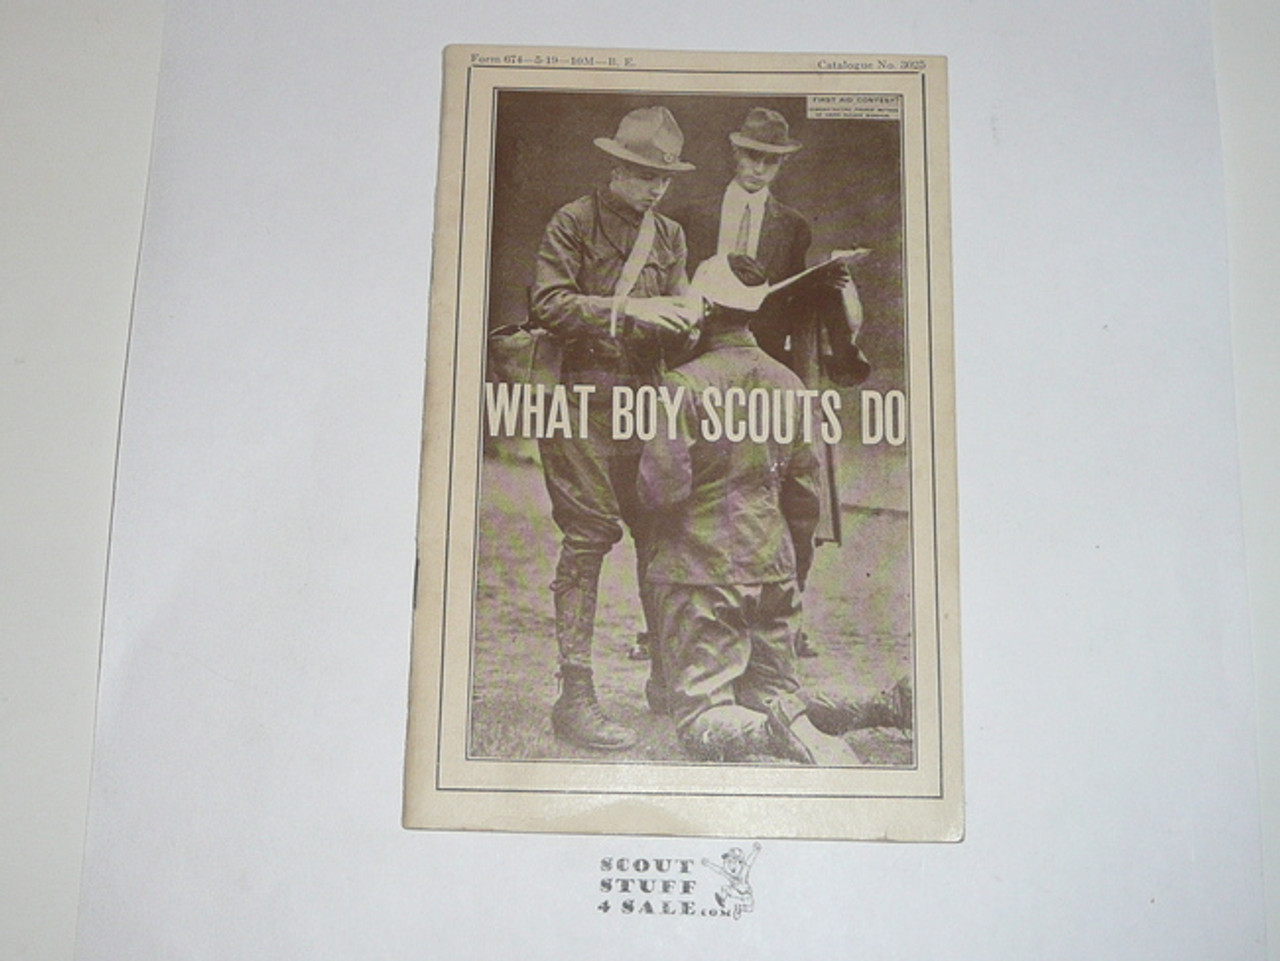 1919 What Boy Scouts Do, Boy Scout Promotional Brochure, Pictoral book, Great teens Scouting pictures, 24 pages, 5-19 printing